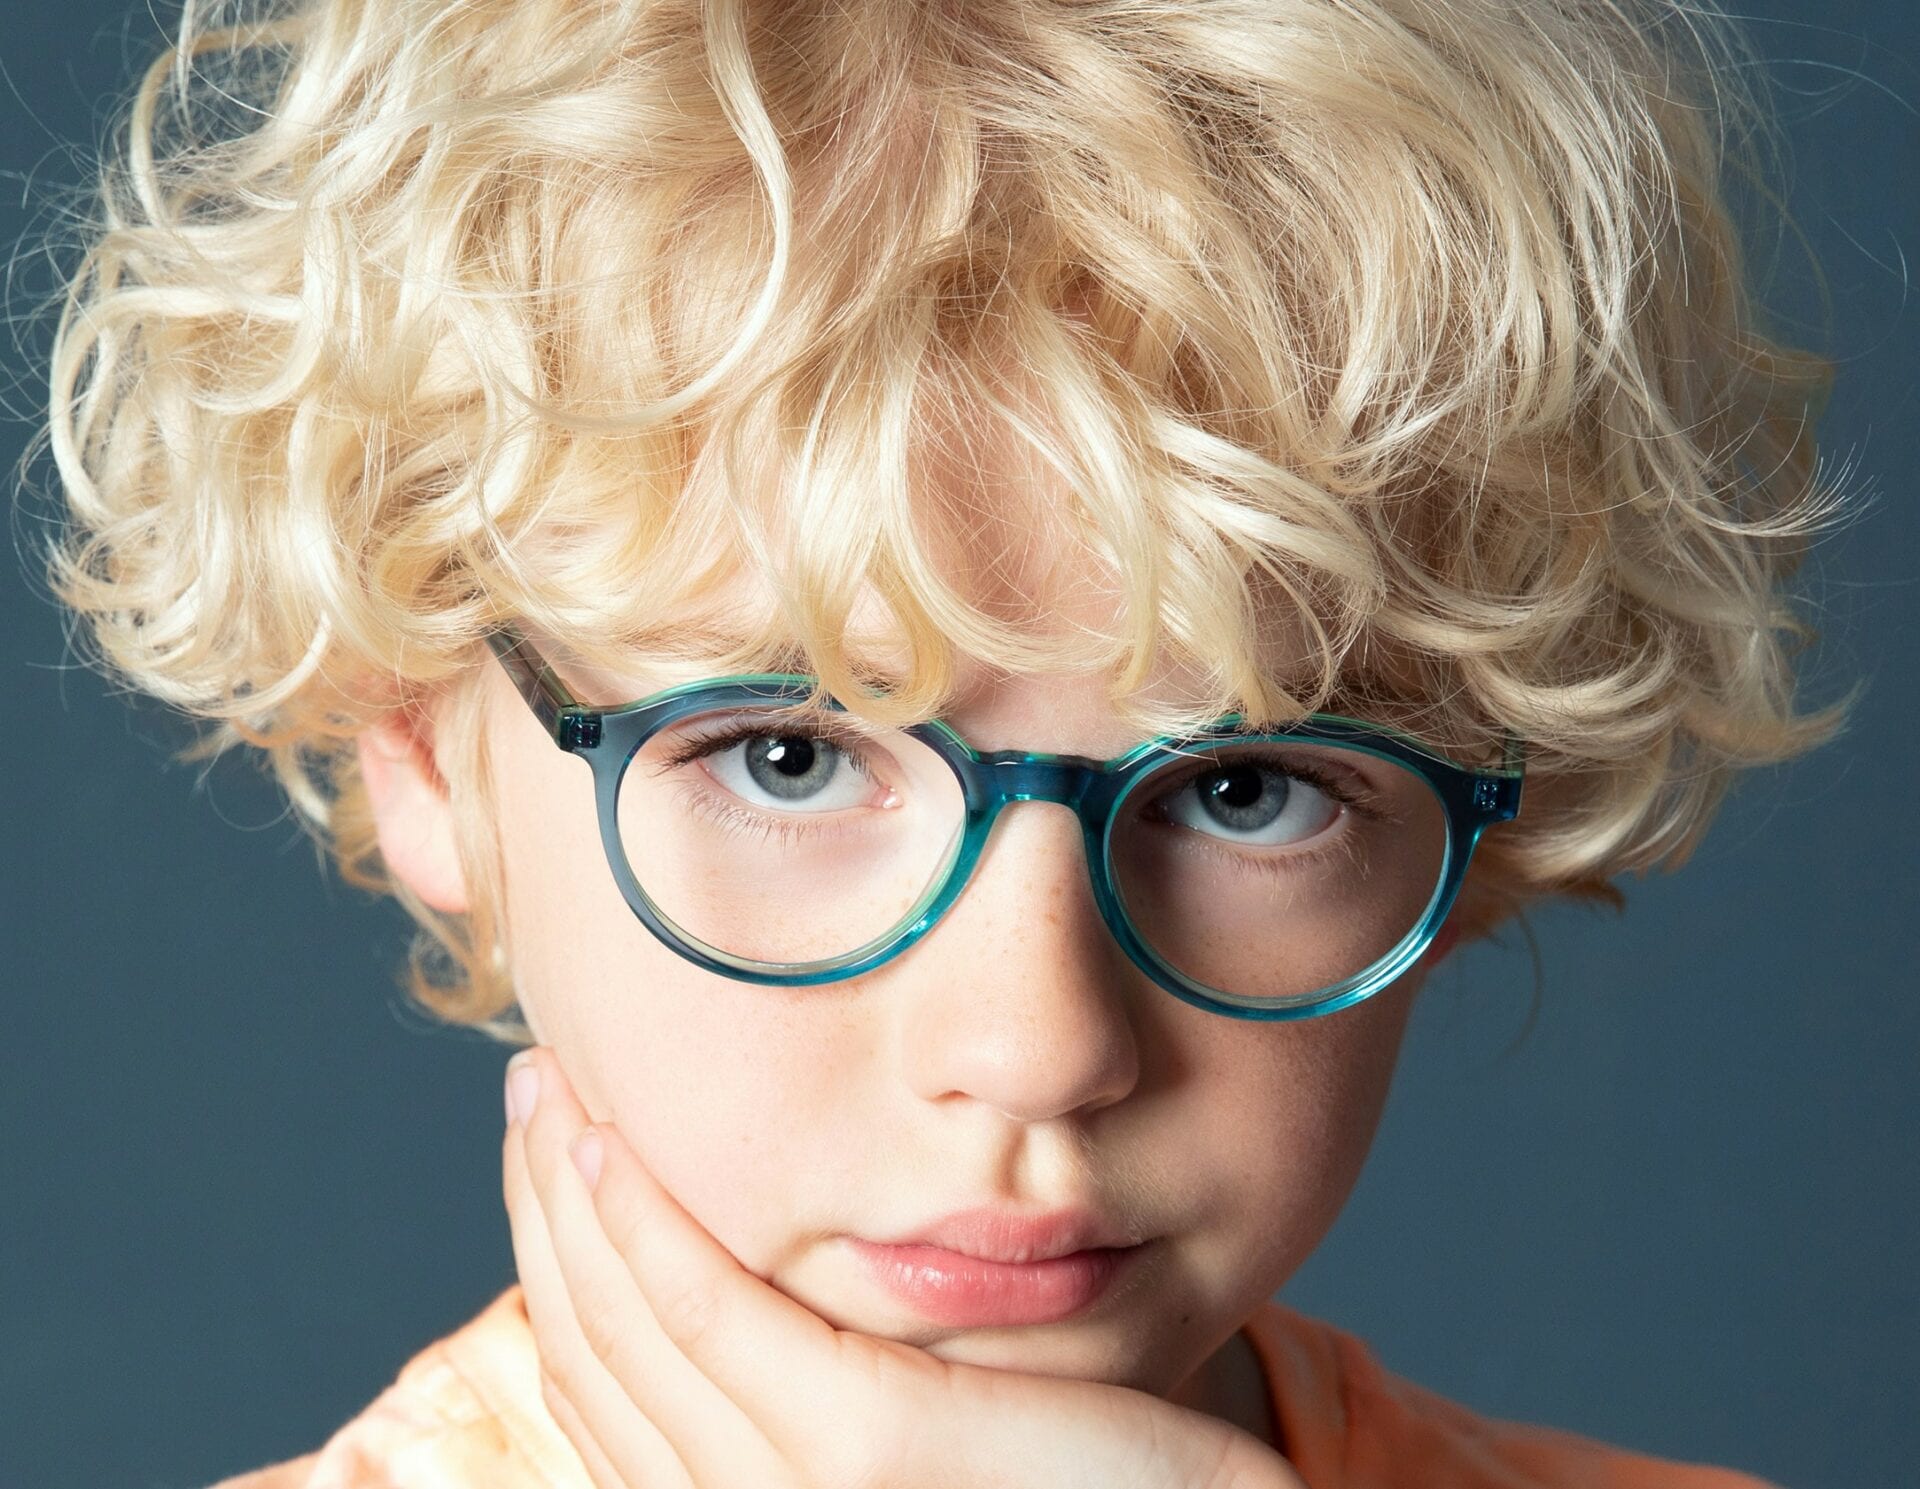 A young boy with blonde hair wearing glasses.